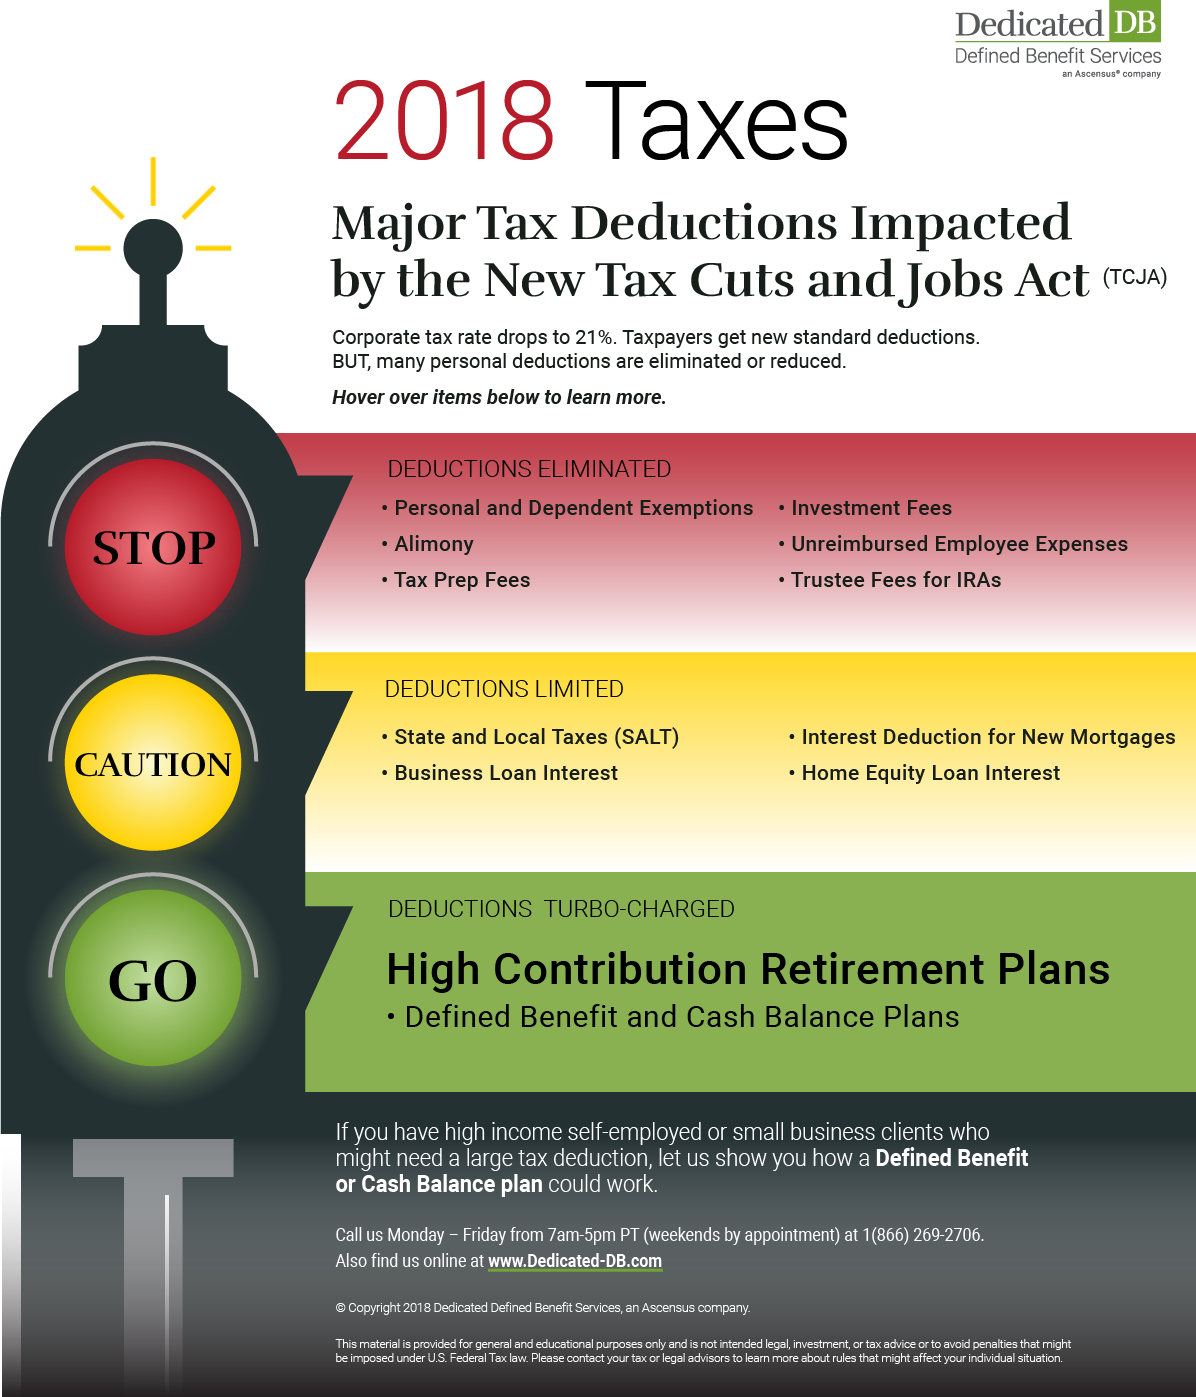 major-tax-deductions-impacted-image